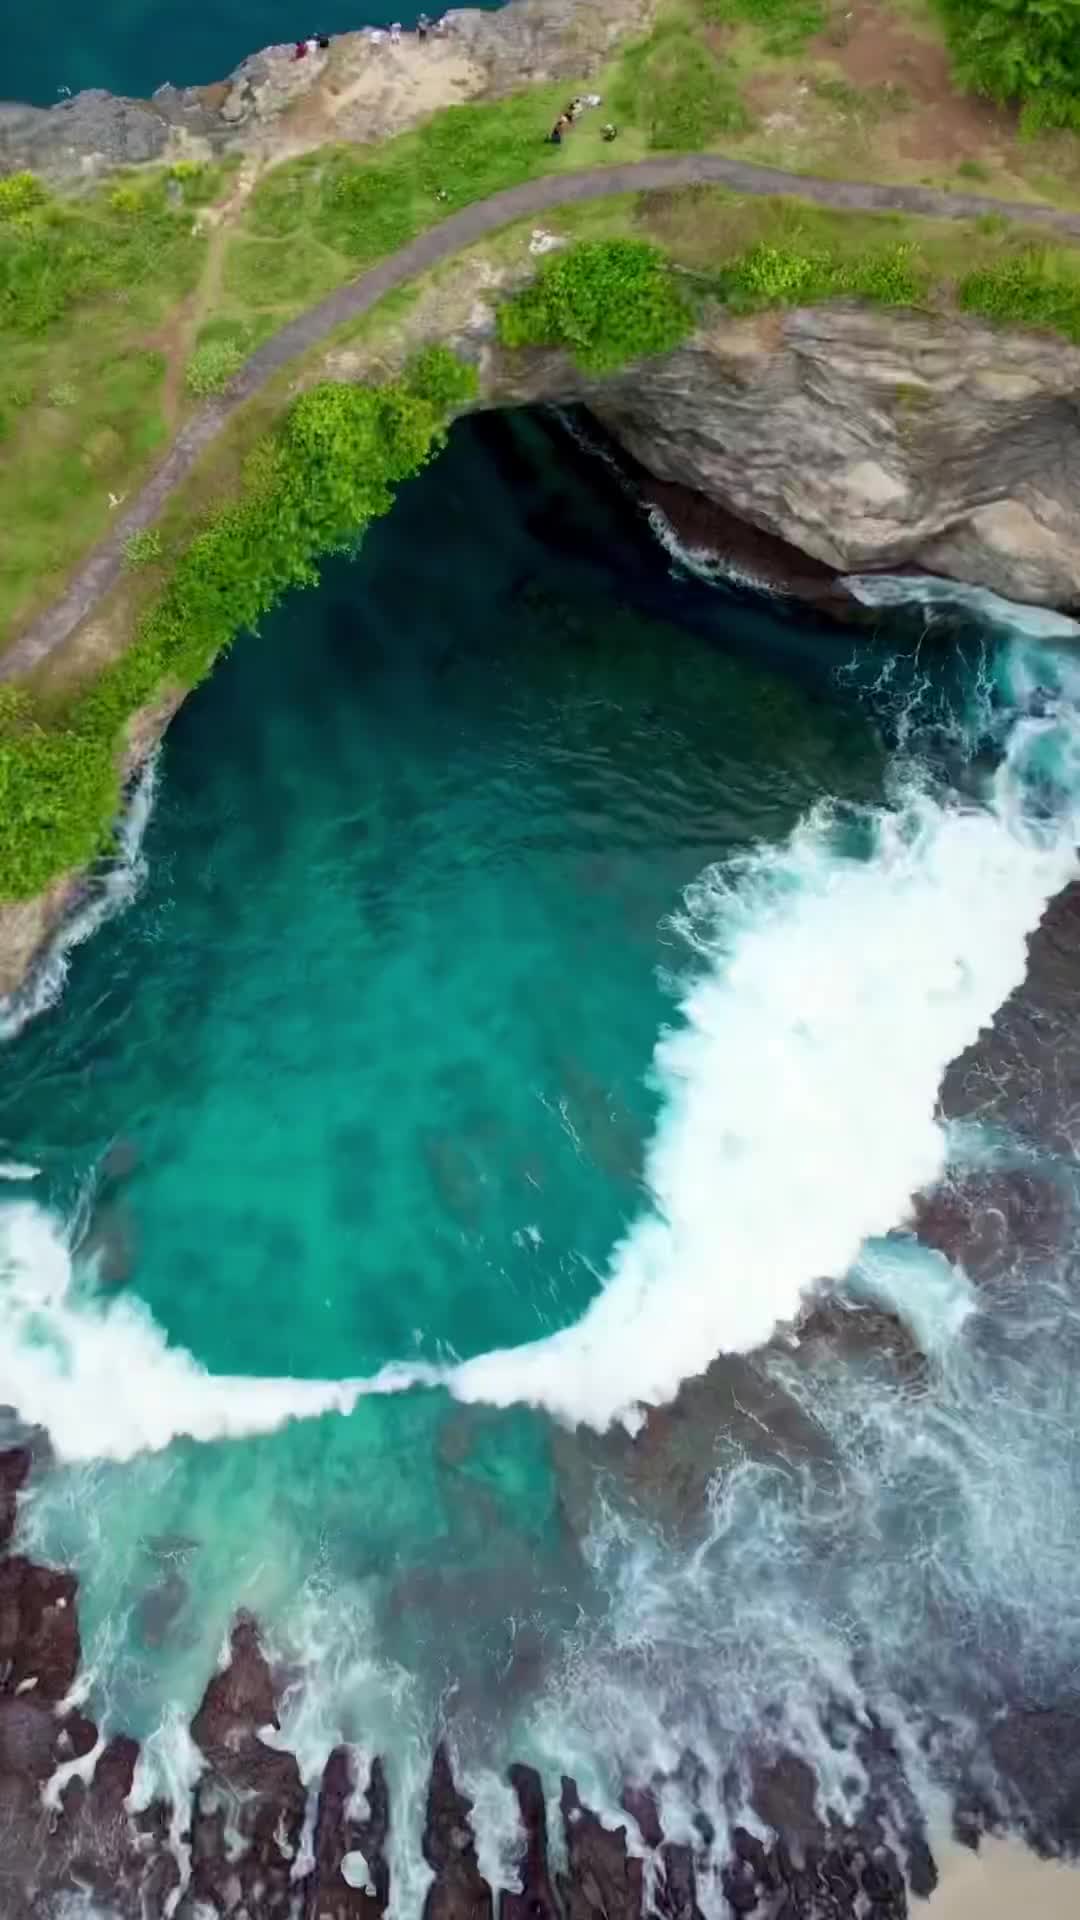 Dance with the waves, let the rhythm of the water set your soul free 🌊

Broken Beach, Nusa Penida, Indonesia 📍

📷 by @expeditioustraveler
@djiglobal Mavic Air 2S

#brokenbeach #nusapenida #indonesia #wonderfulindonesia #travelasia #dji #welivetoexplore